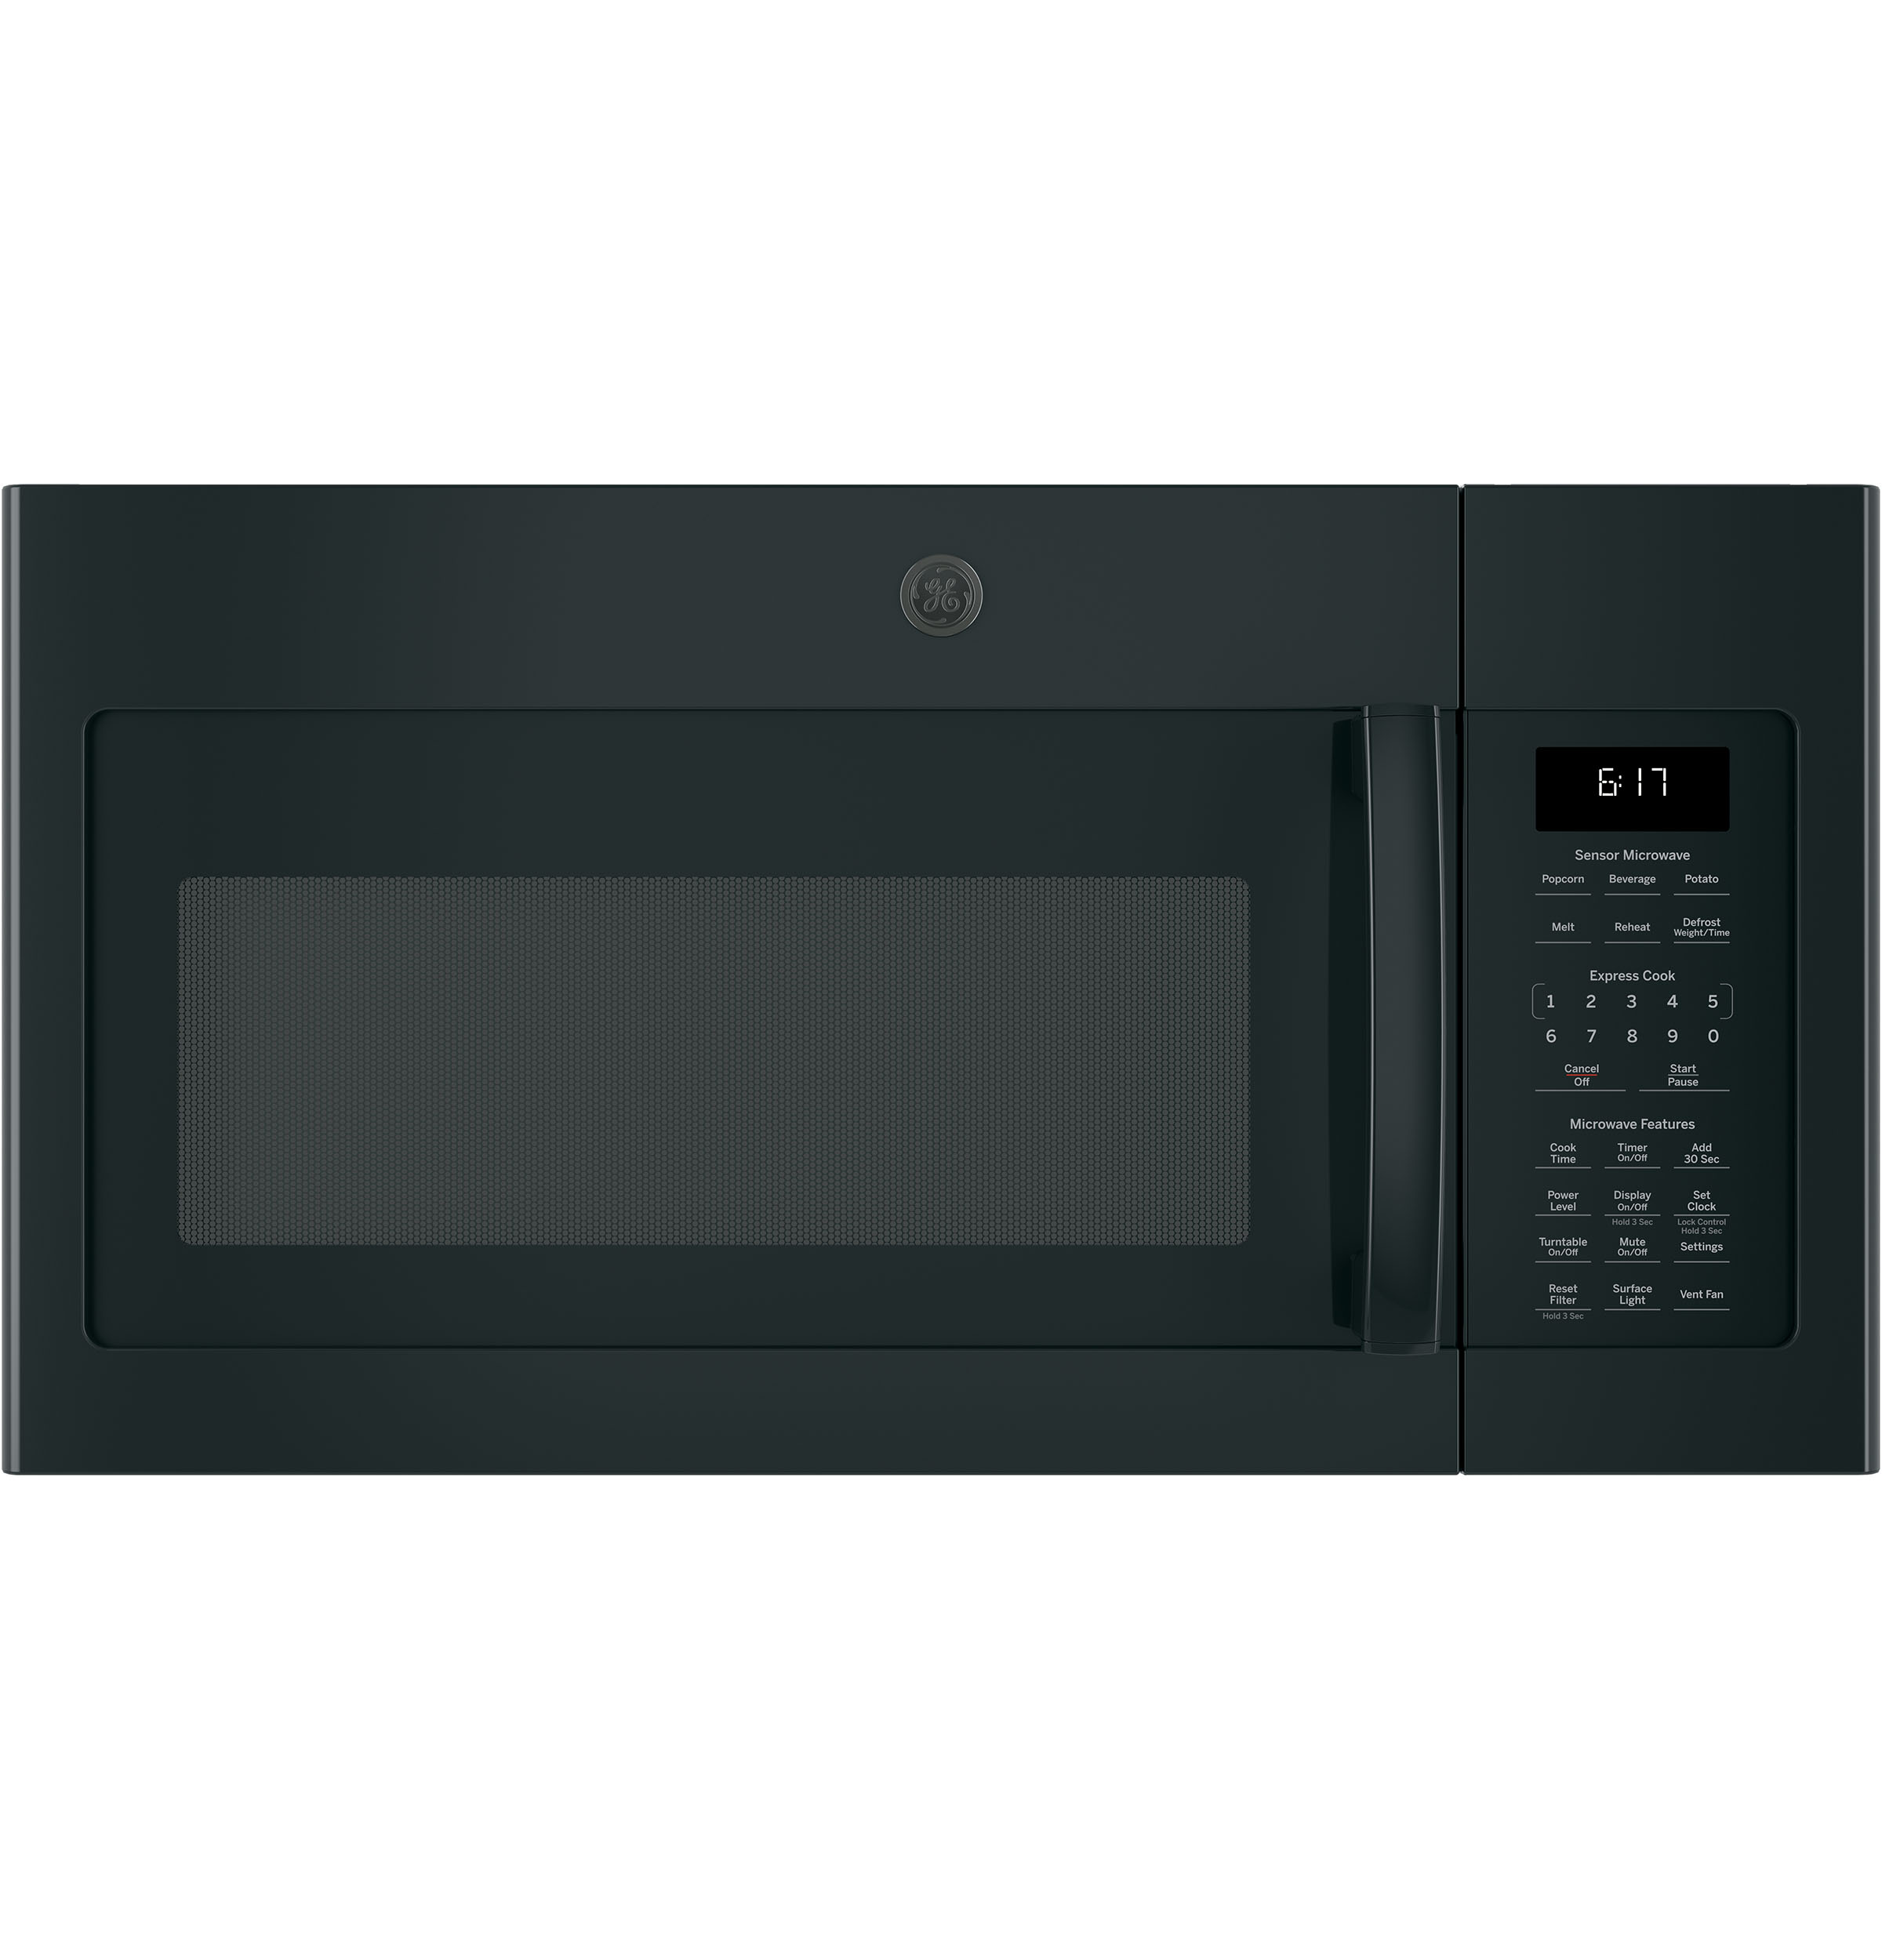 User Manual For Ge Microwave Ovens